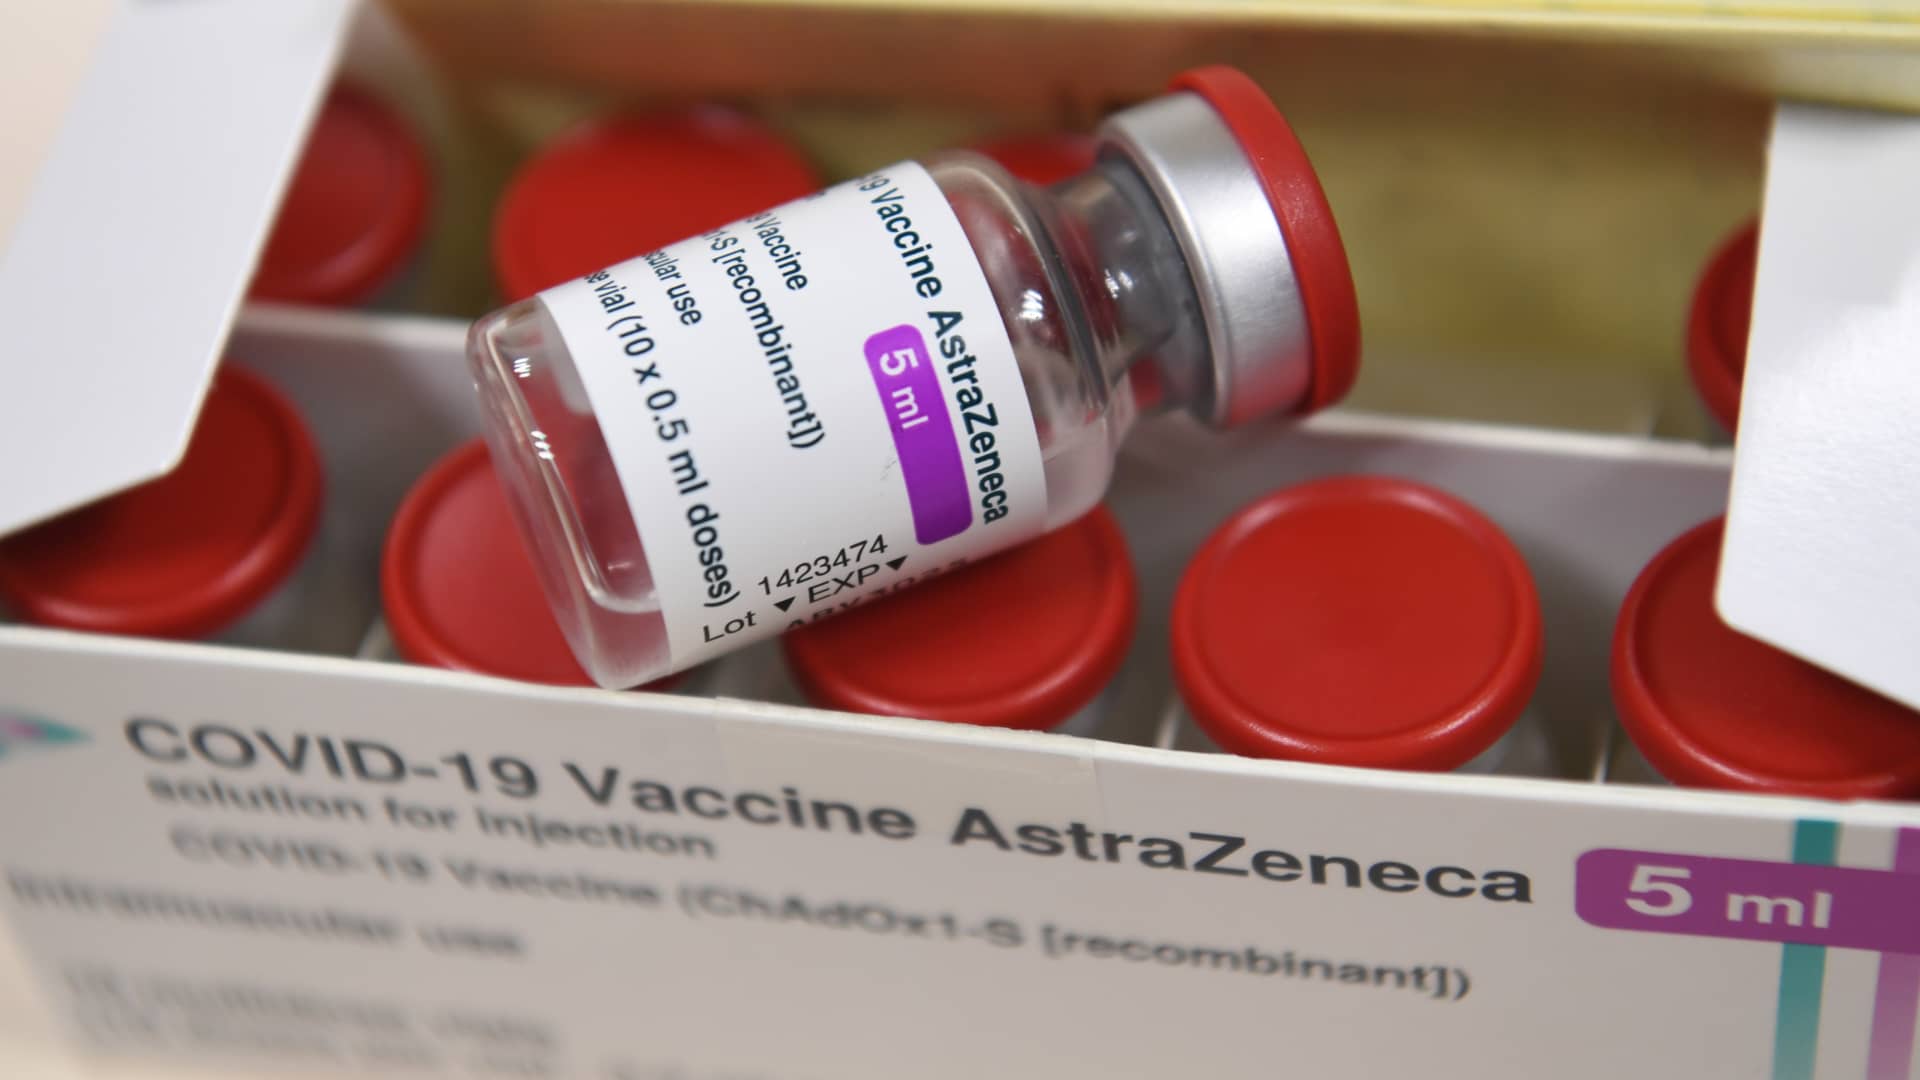 A box containing vials of the AstraZeneca Covid-19 vaccine is pictured at the Foch hospital in Suresnes, on February 6, 2021, on the start of a vaccination campaign for health workers with the AstraZeneca/Oxford vaccine.